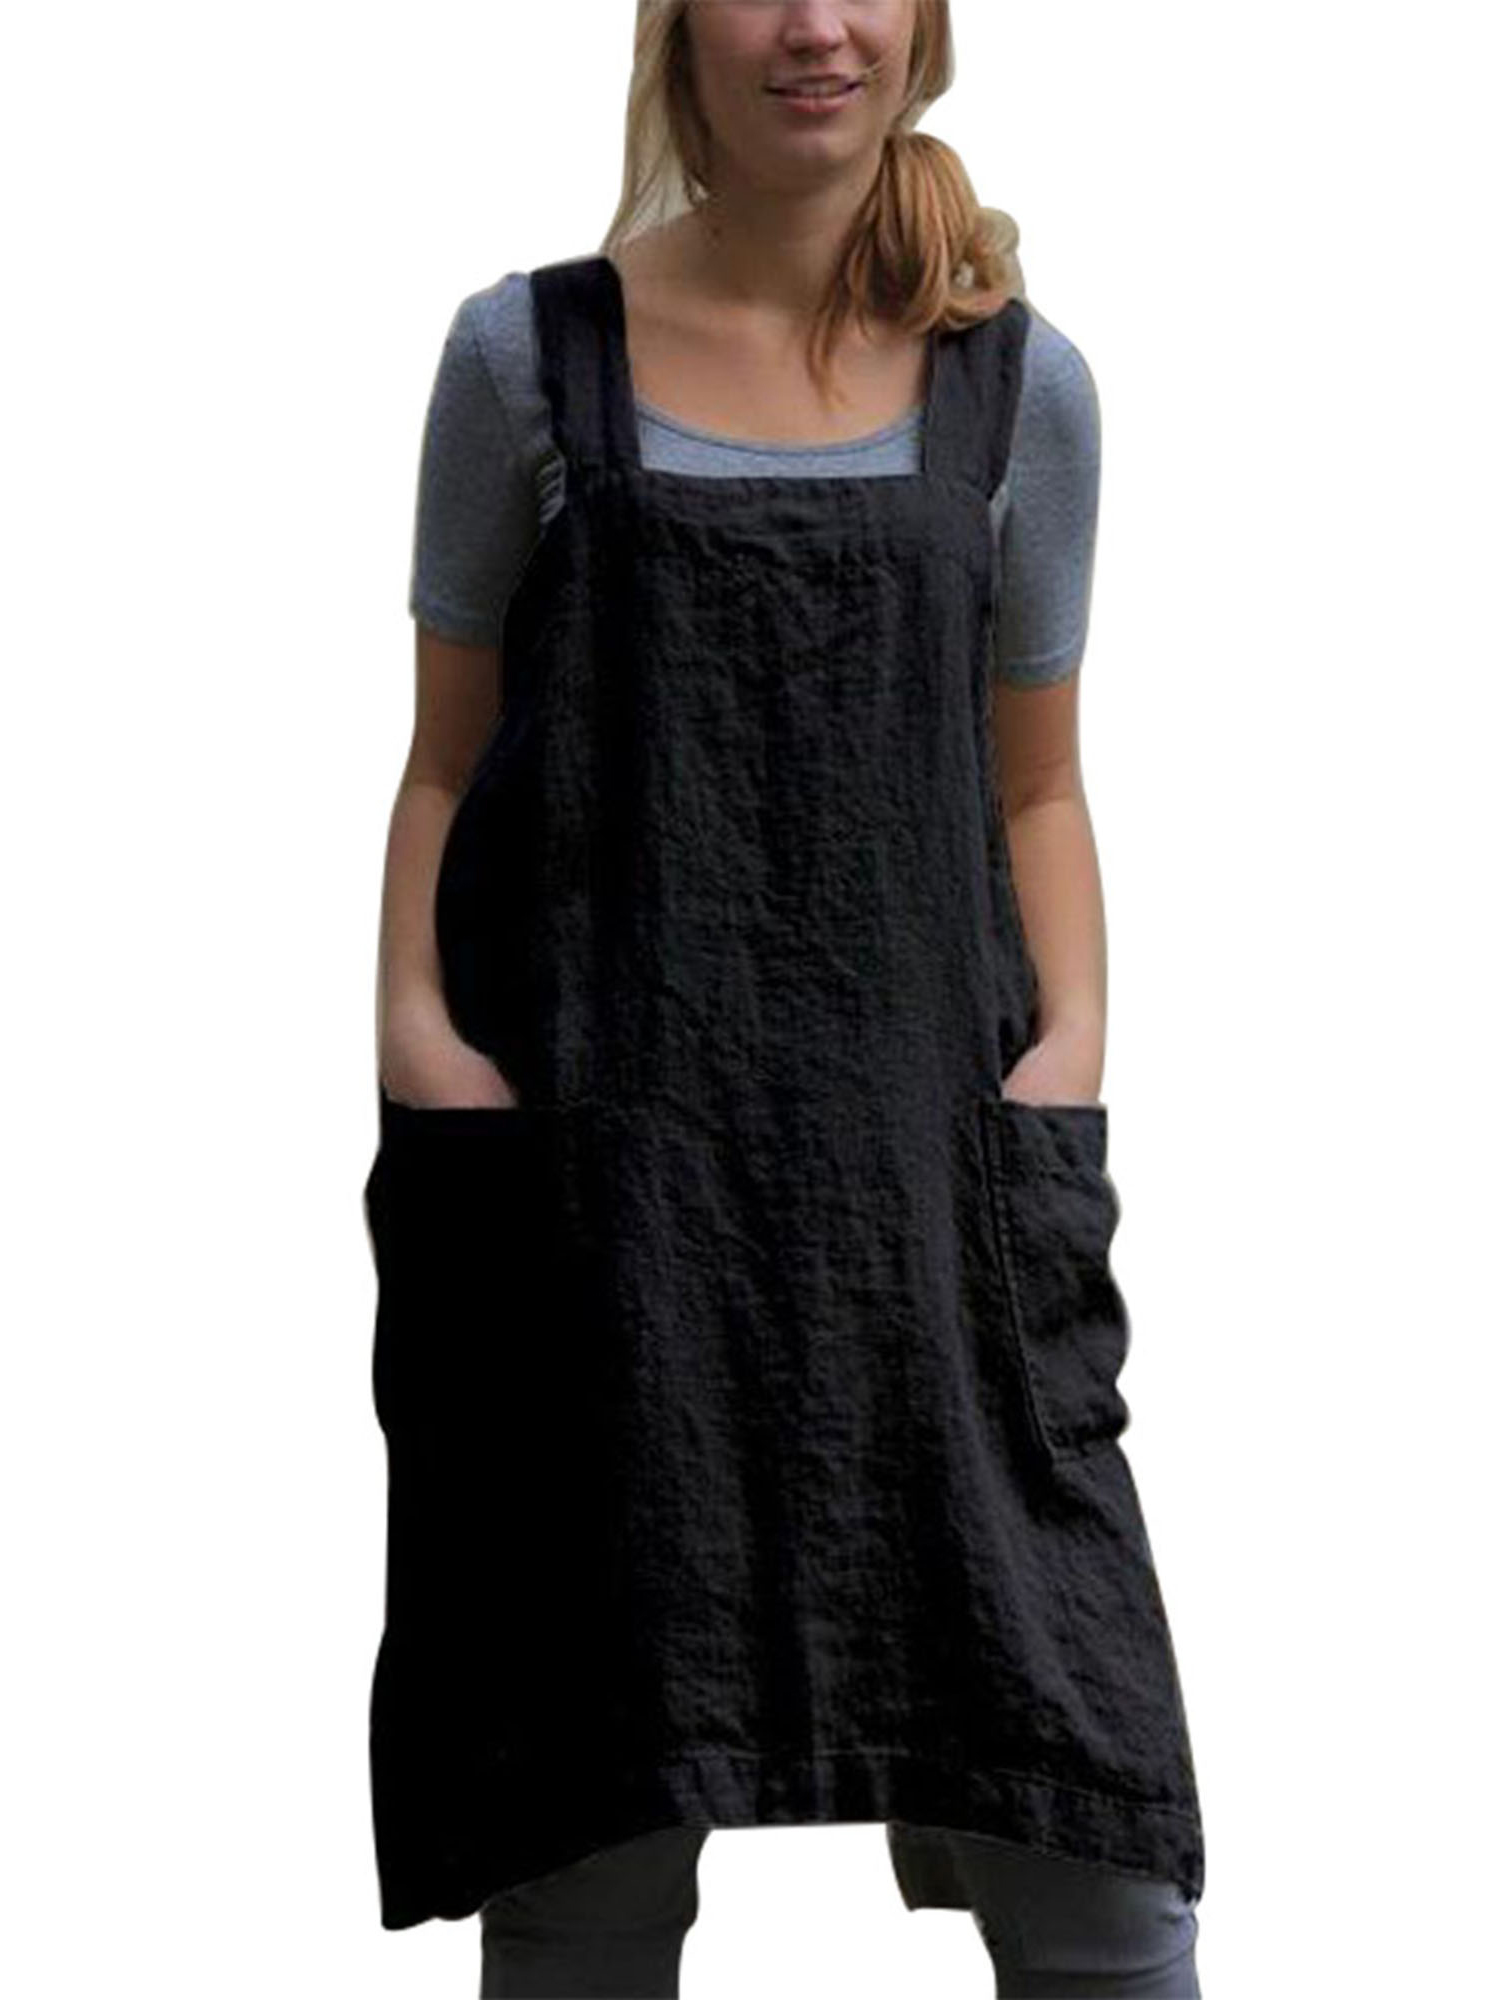 Listenwind Women’s Pinafore Square Apron Baking Cooking Gardening Works Cross Back Cotton/Linen Blend Dress with 2 Pockets Large Plus - image 3 of 5